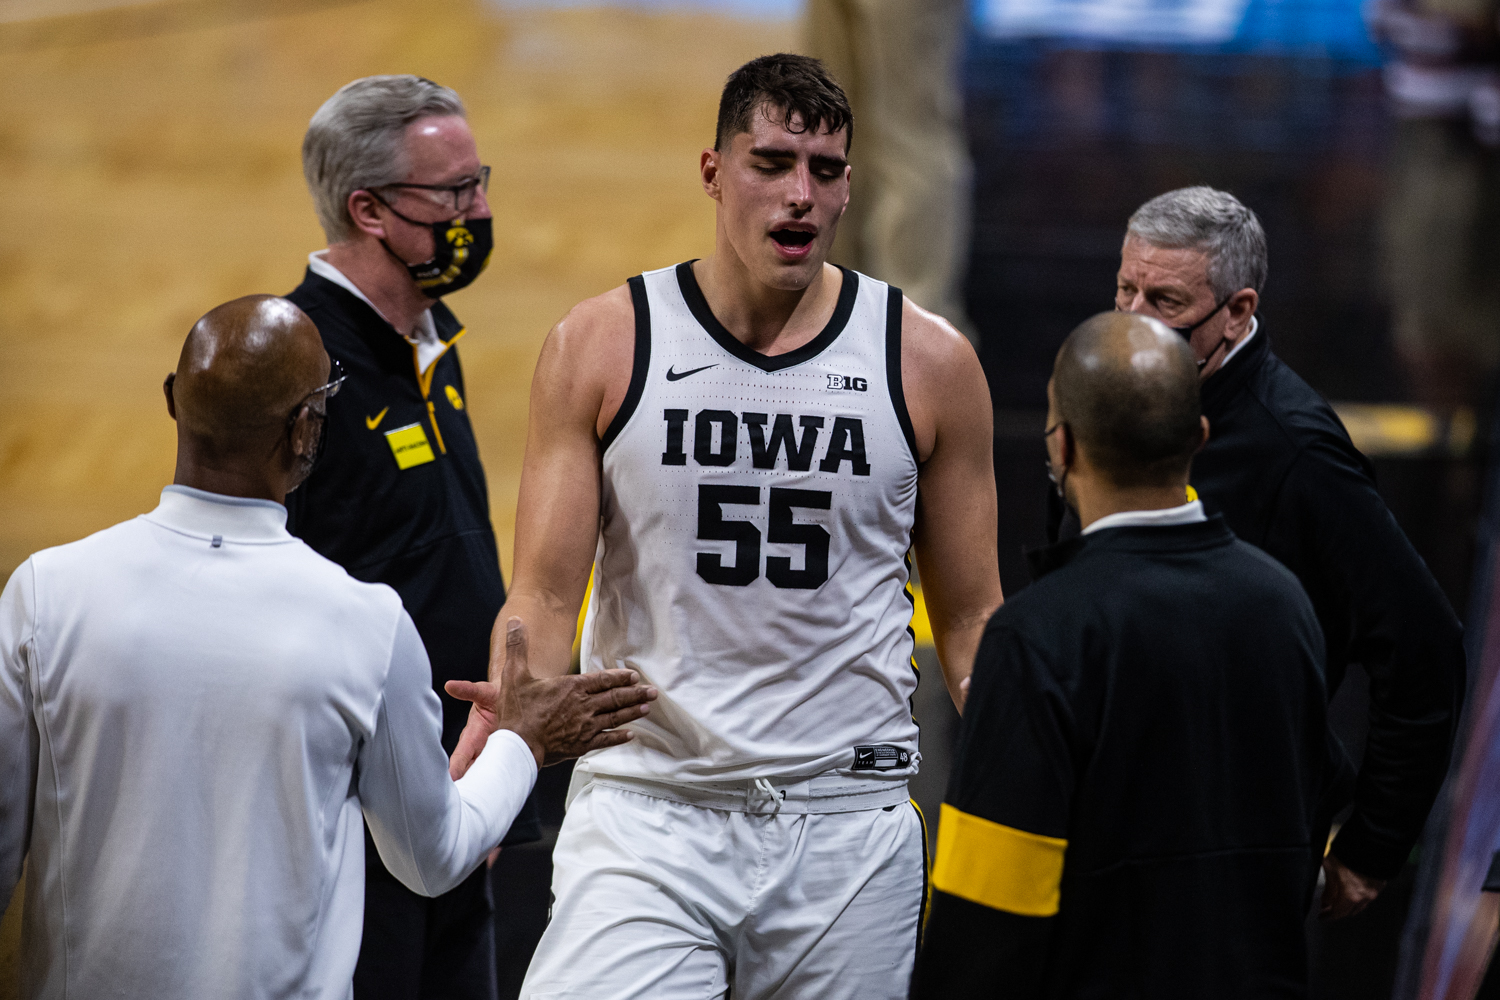 One-on-one with former Iowa guard B.J. Armstrong - The Daily Iowan